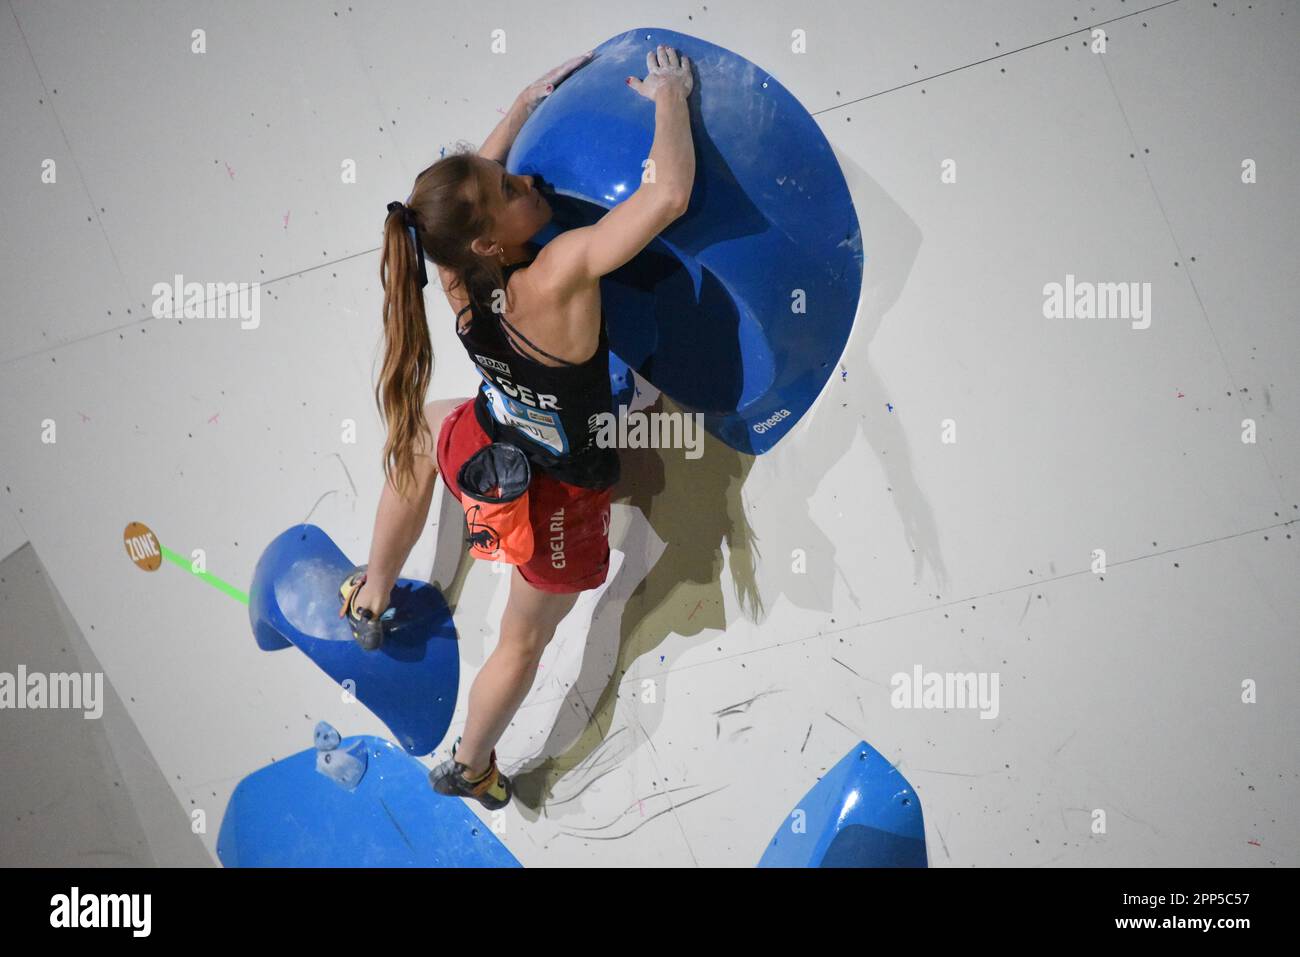 Hachioji. 22nd Apr, 2023. Hannah Meul of Germany competes during the women's boulder final of IFSC Climbing World Cup 2023 in Hachioji, Japan on April 22, 2023. Credit: Yue Chenxing/Xinhua/Alamy Live News Stock Photo